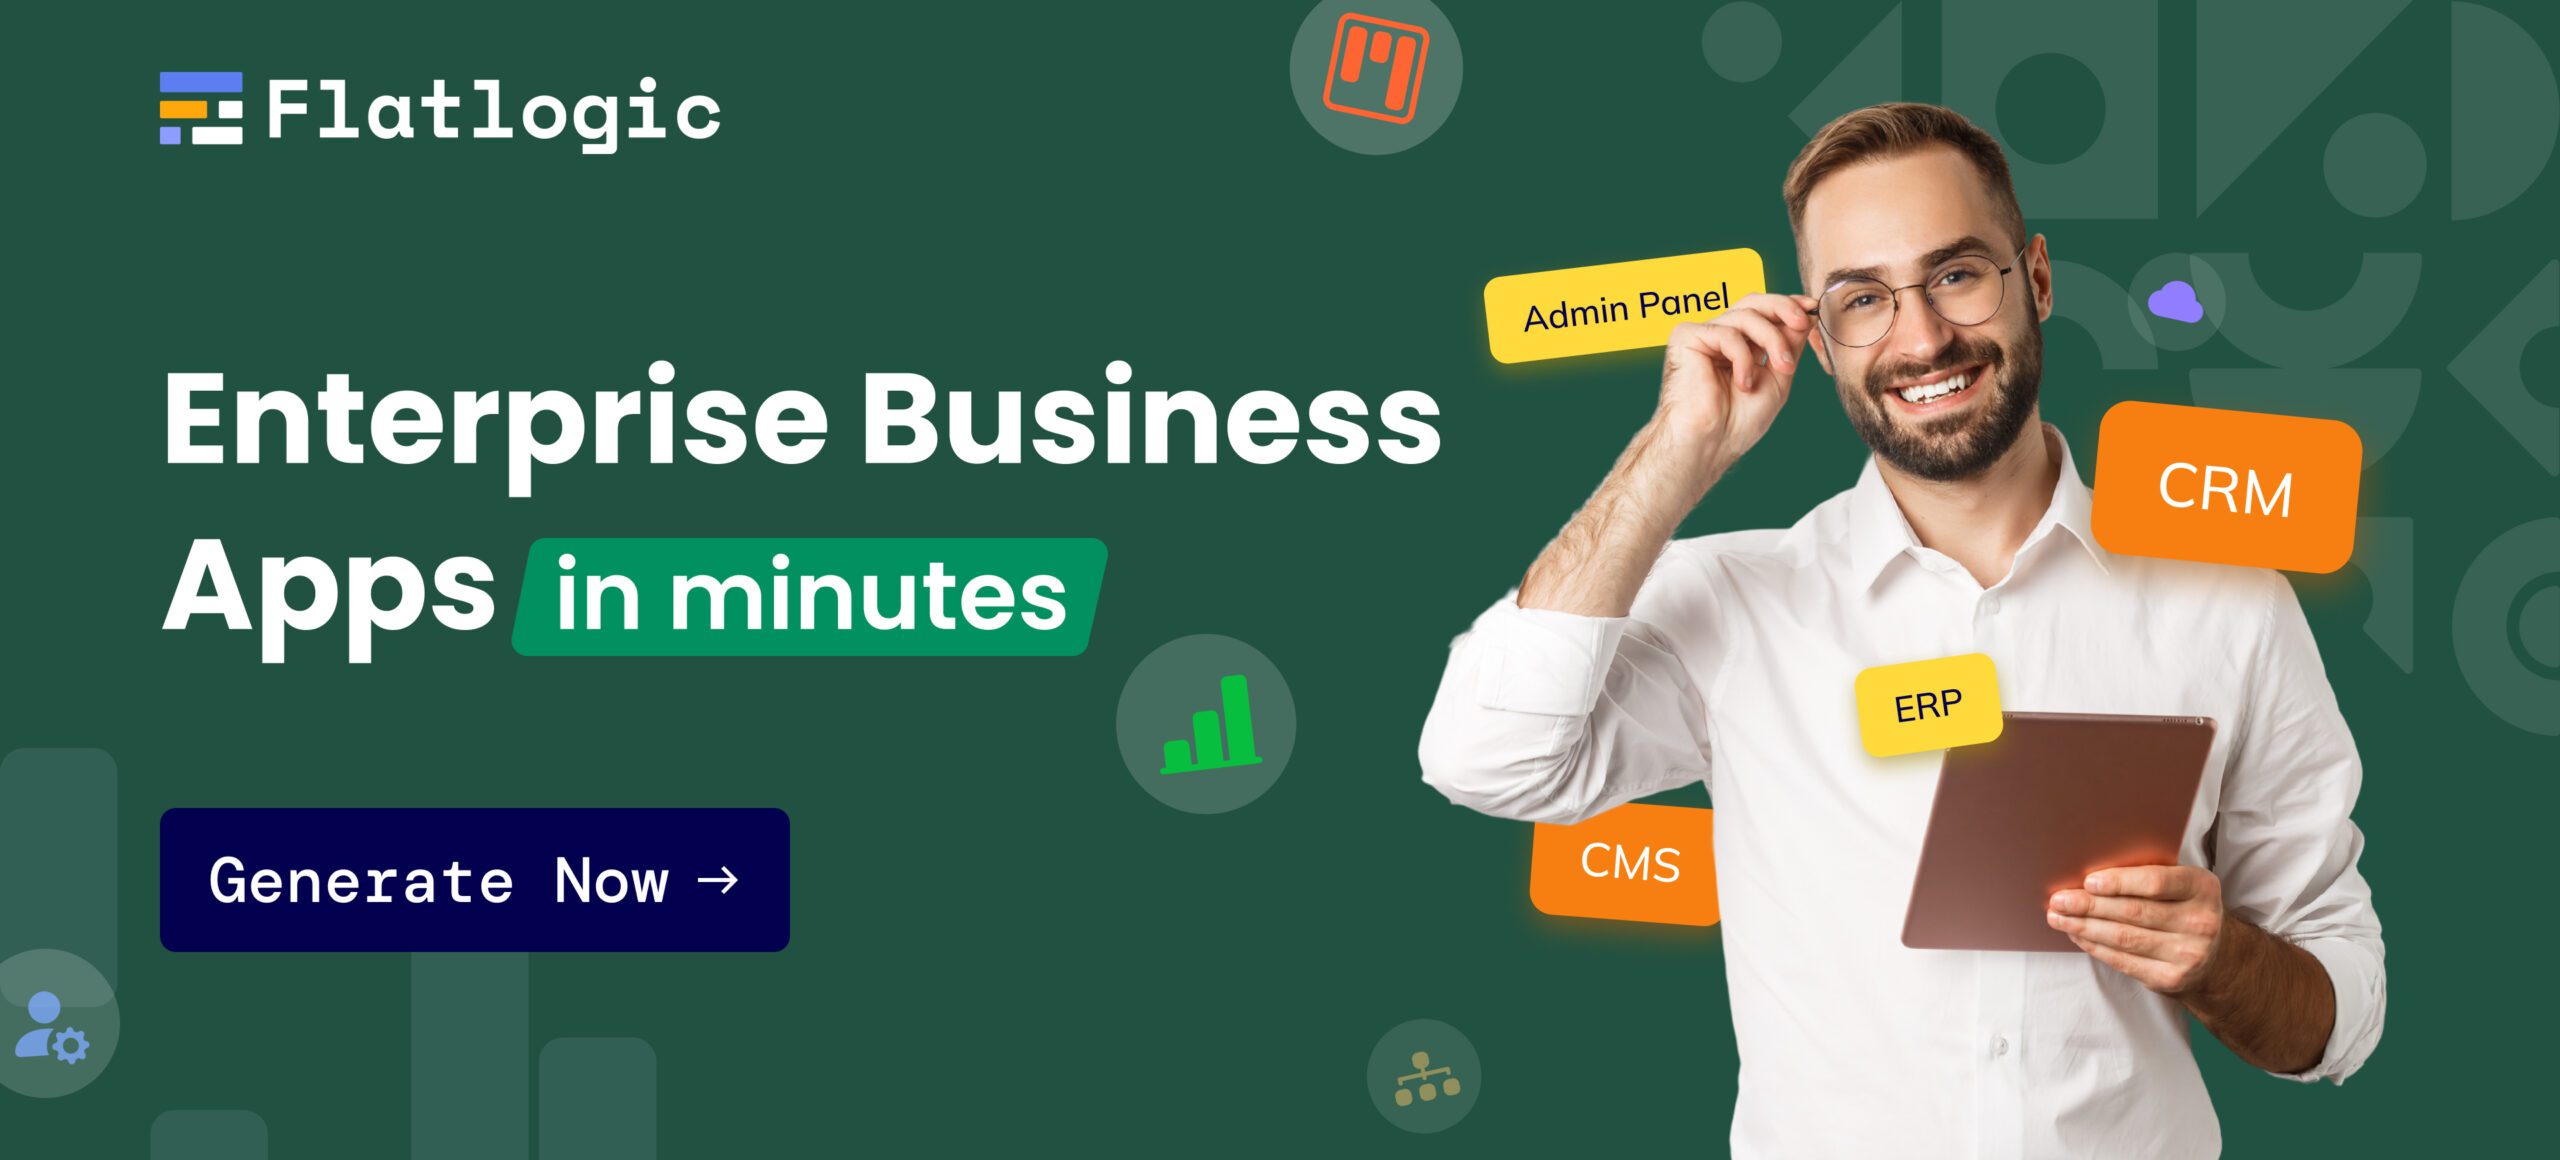 Enterprise Business Apps in minutes. Generate Now!